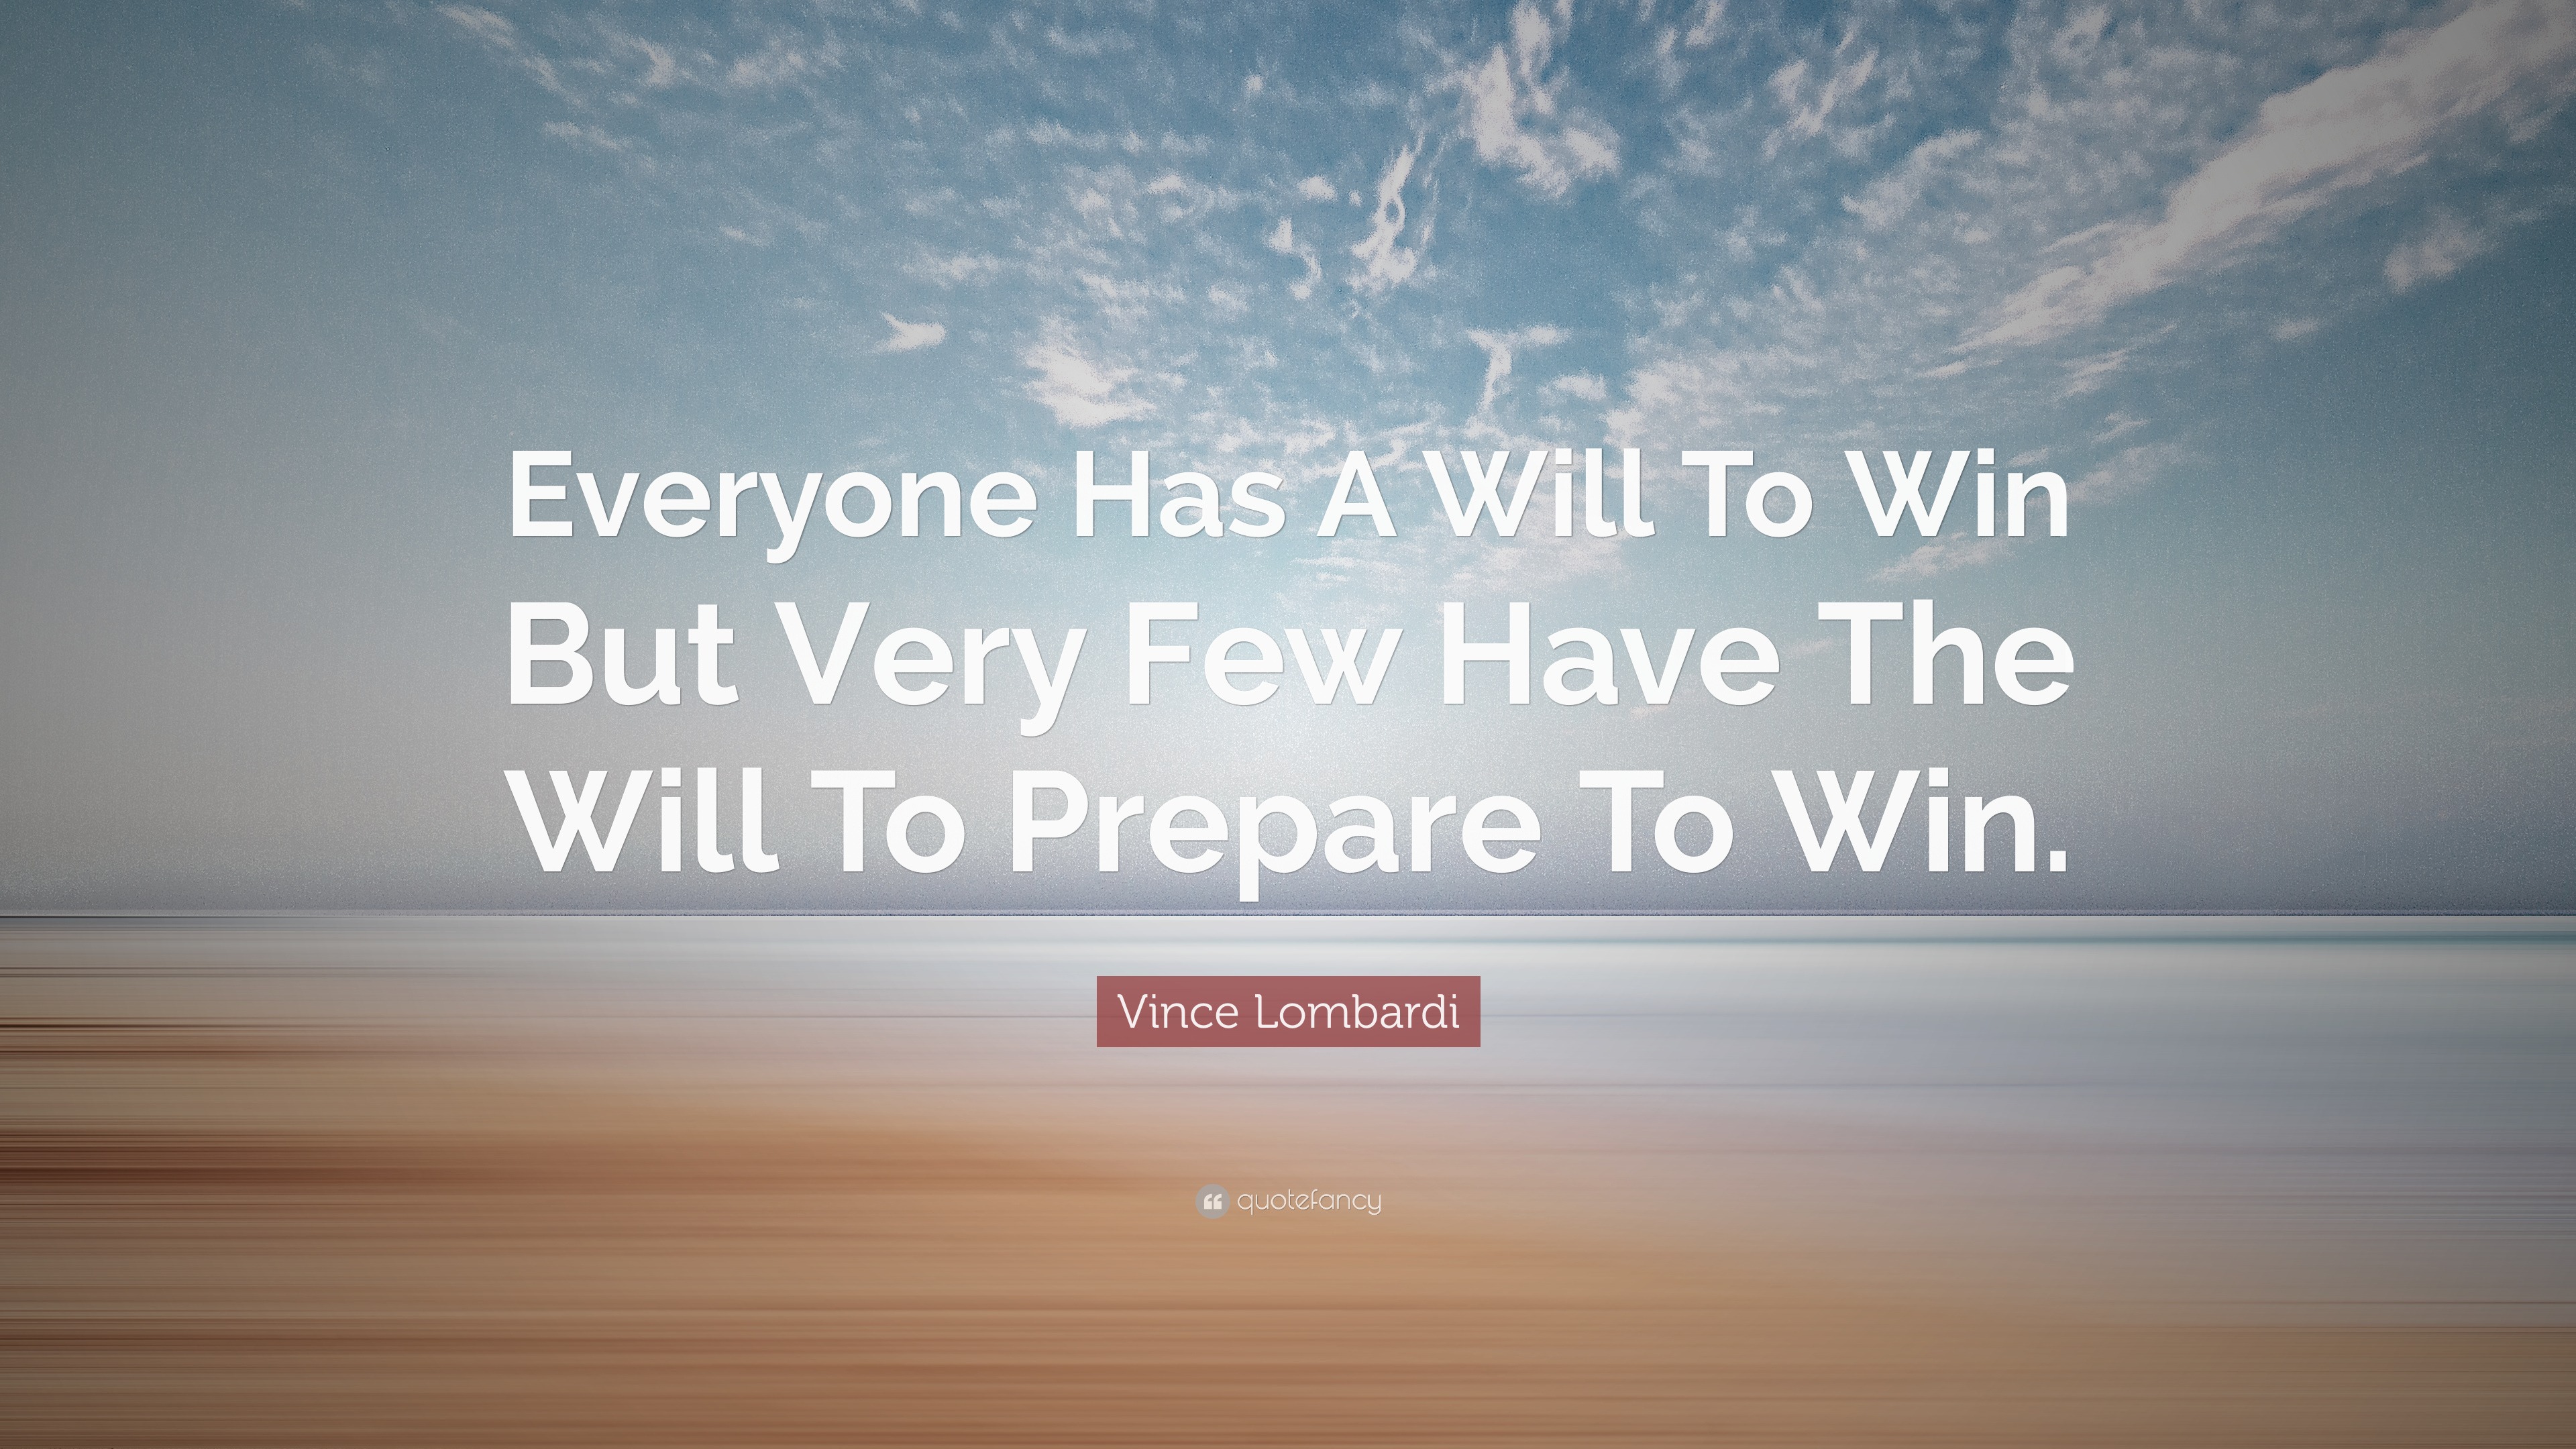 Vince Lombardi Quote: “Everyone Has A Will To Win But Very Few Have The ...